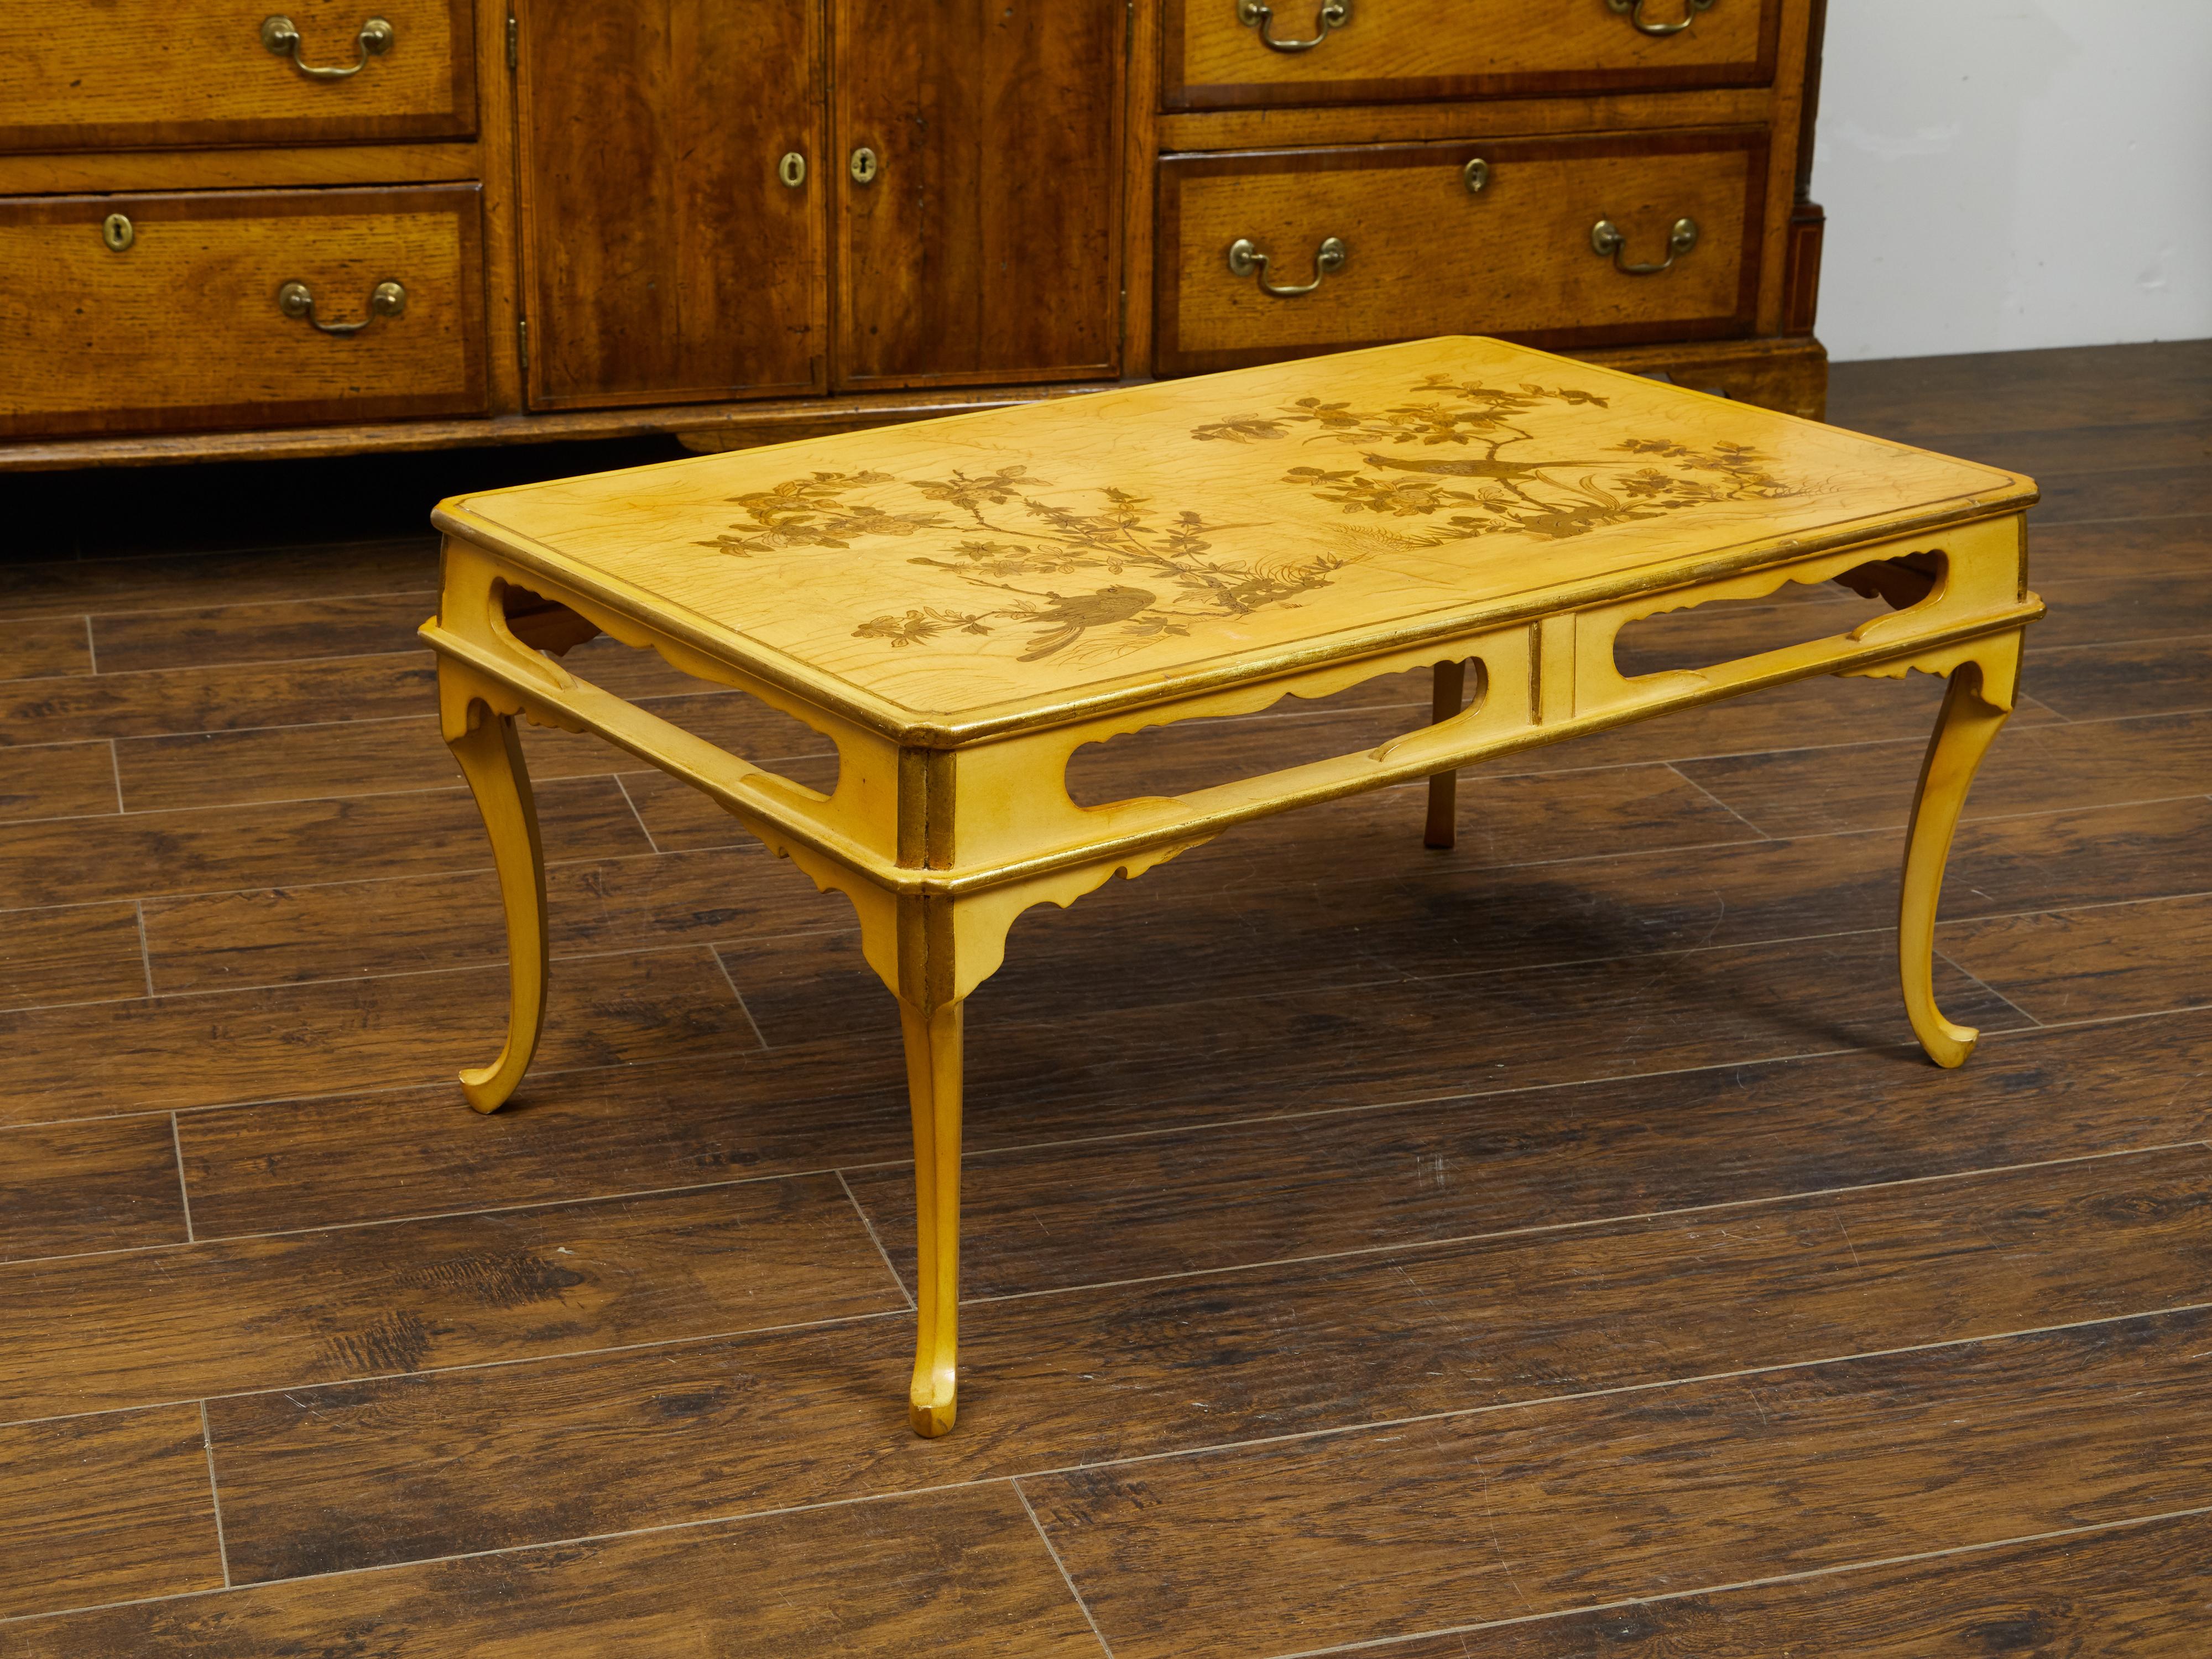 A French chinoiserie style coffee table from the mid 20th century, with birds and foliage. Created in France during the midcentury period, this coffee table charms us with its delicate chinoiserie décor adorning the top. Two birds are perched on the